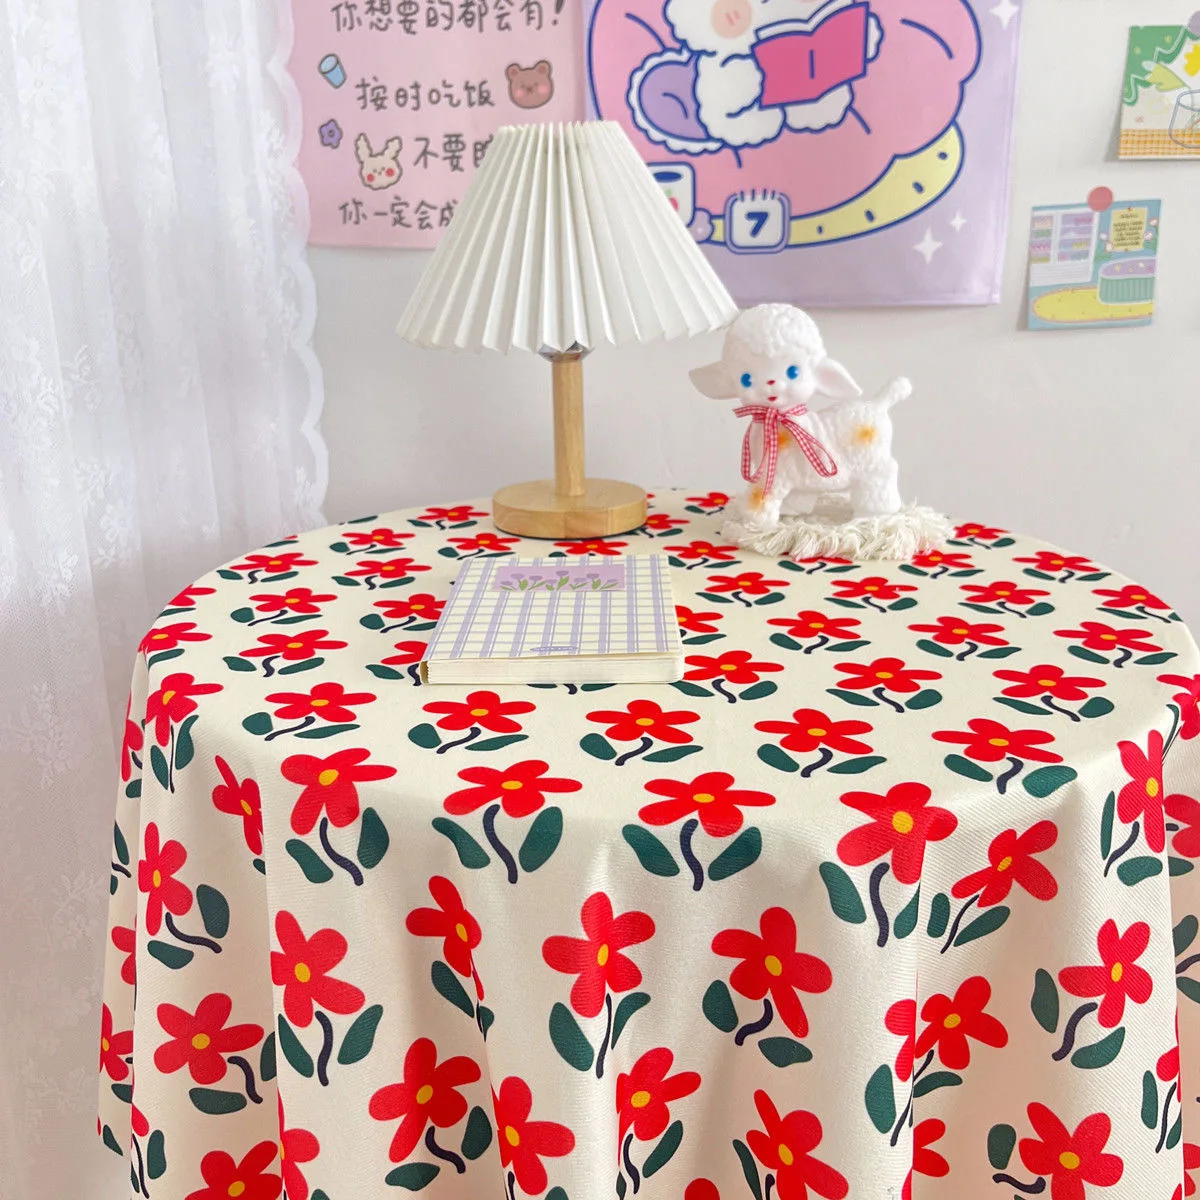 

Checkered Book Table Cloth Fabric Art Girl Heart Inn Style Bedroom Table Cloth Table Cloth Xiao Qing New Style R8D3936